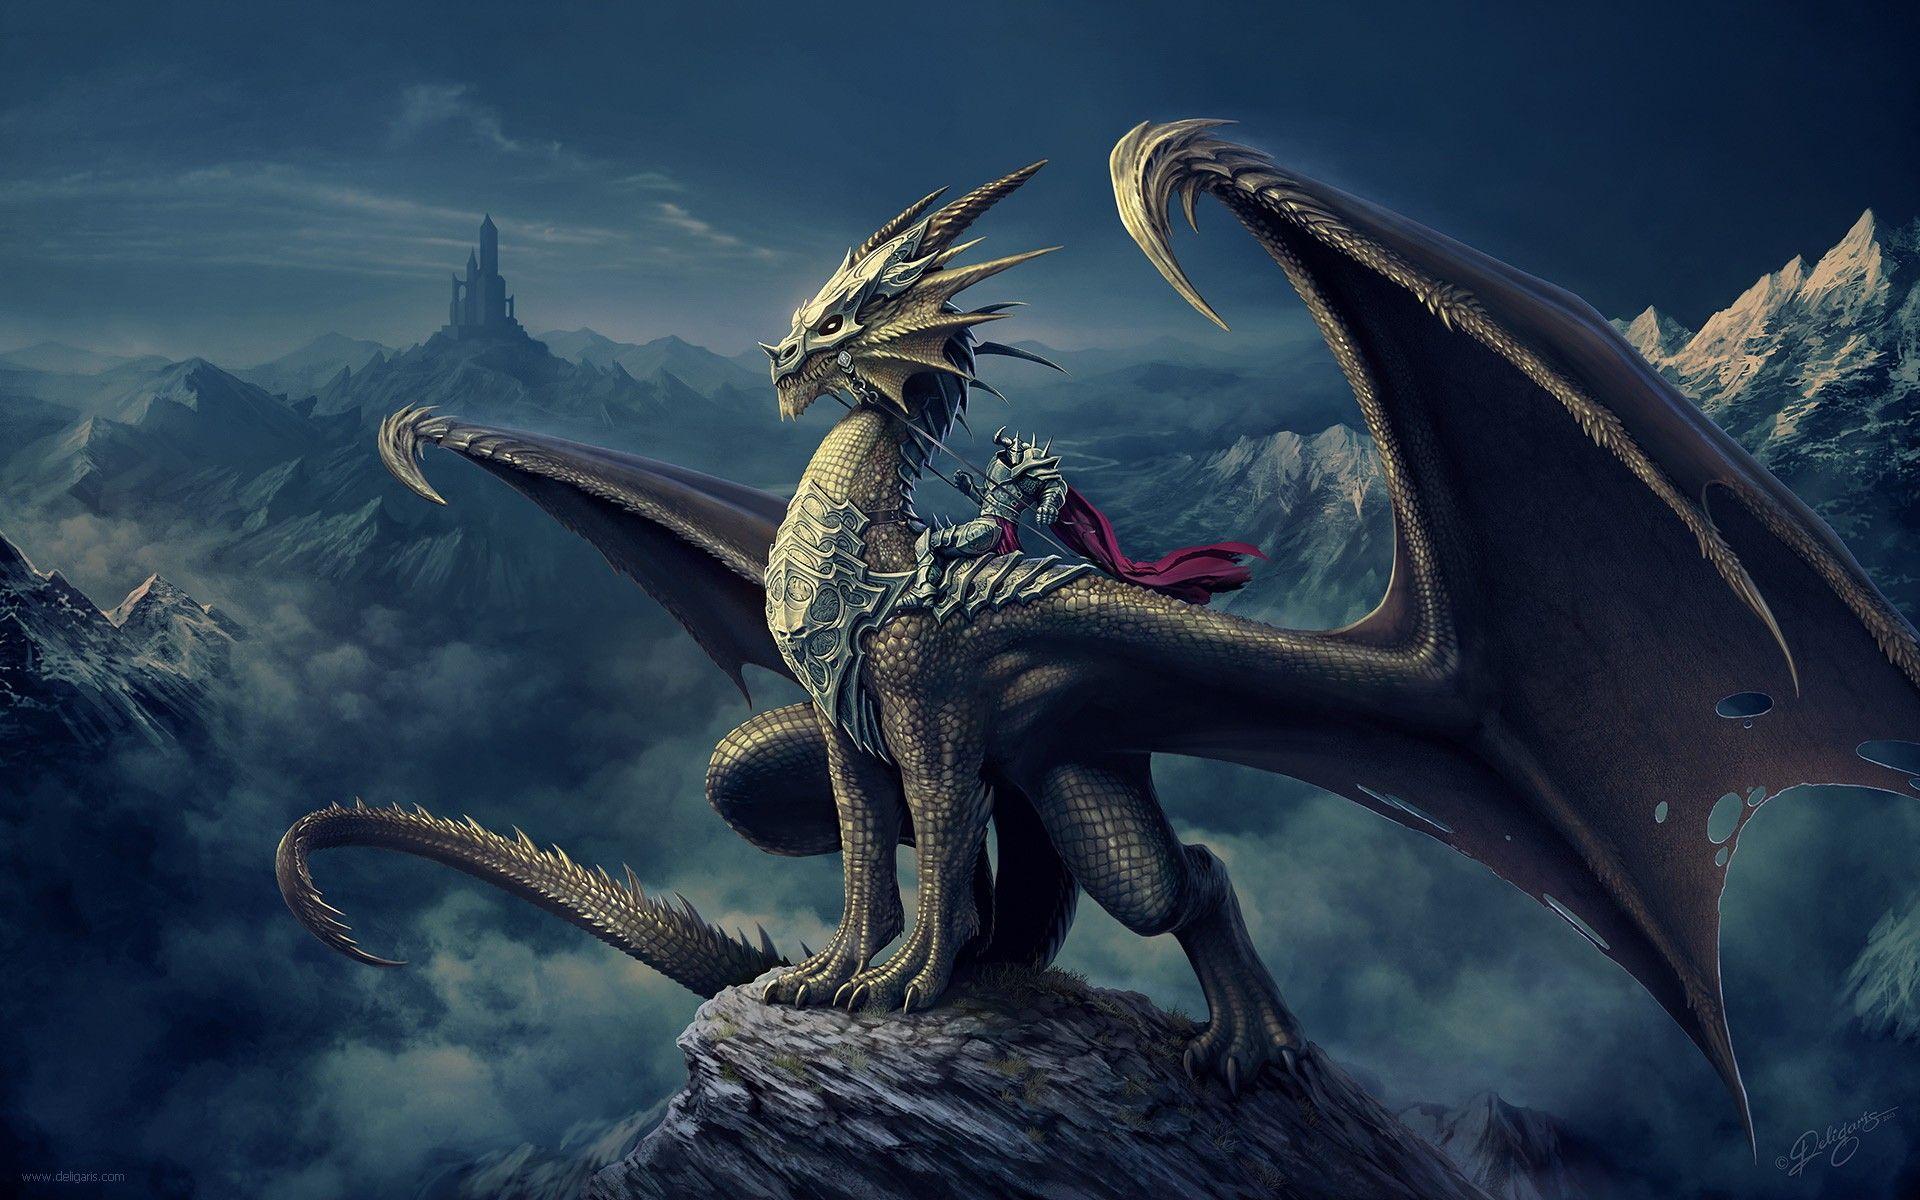 The Dragon # 2560x1600. All For Desktop